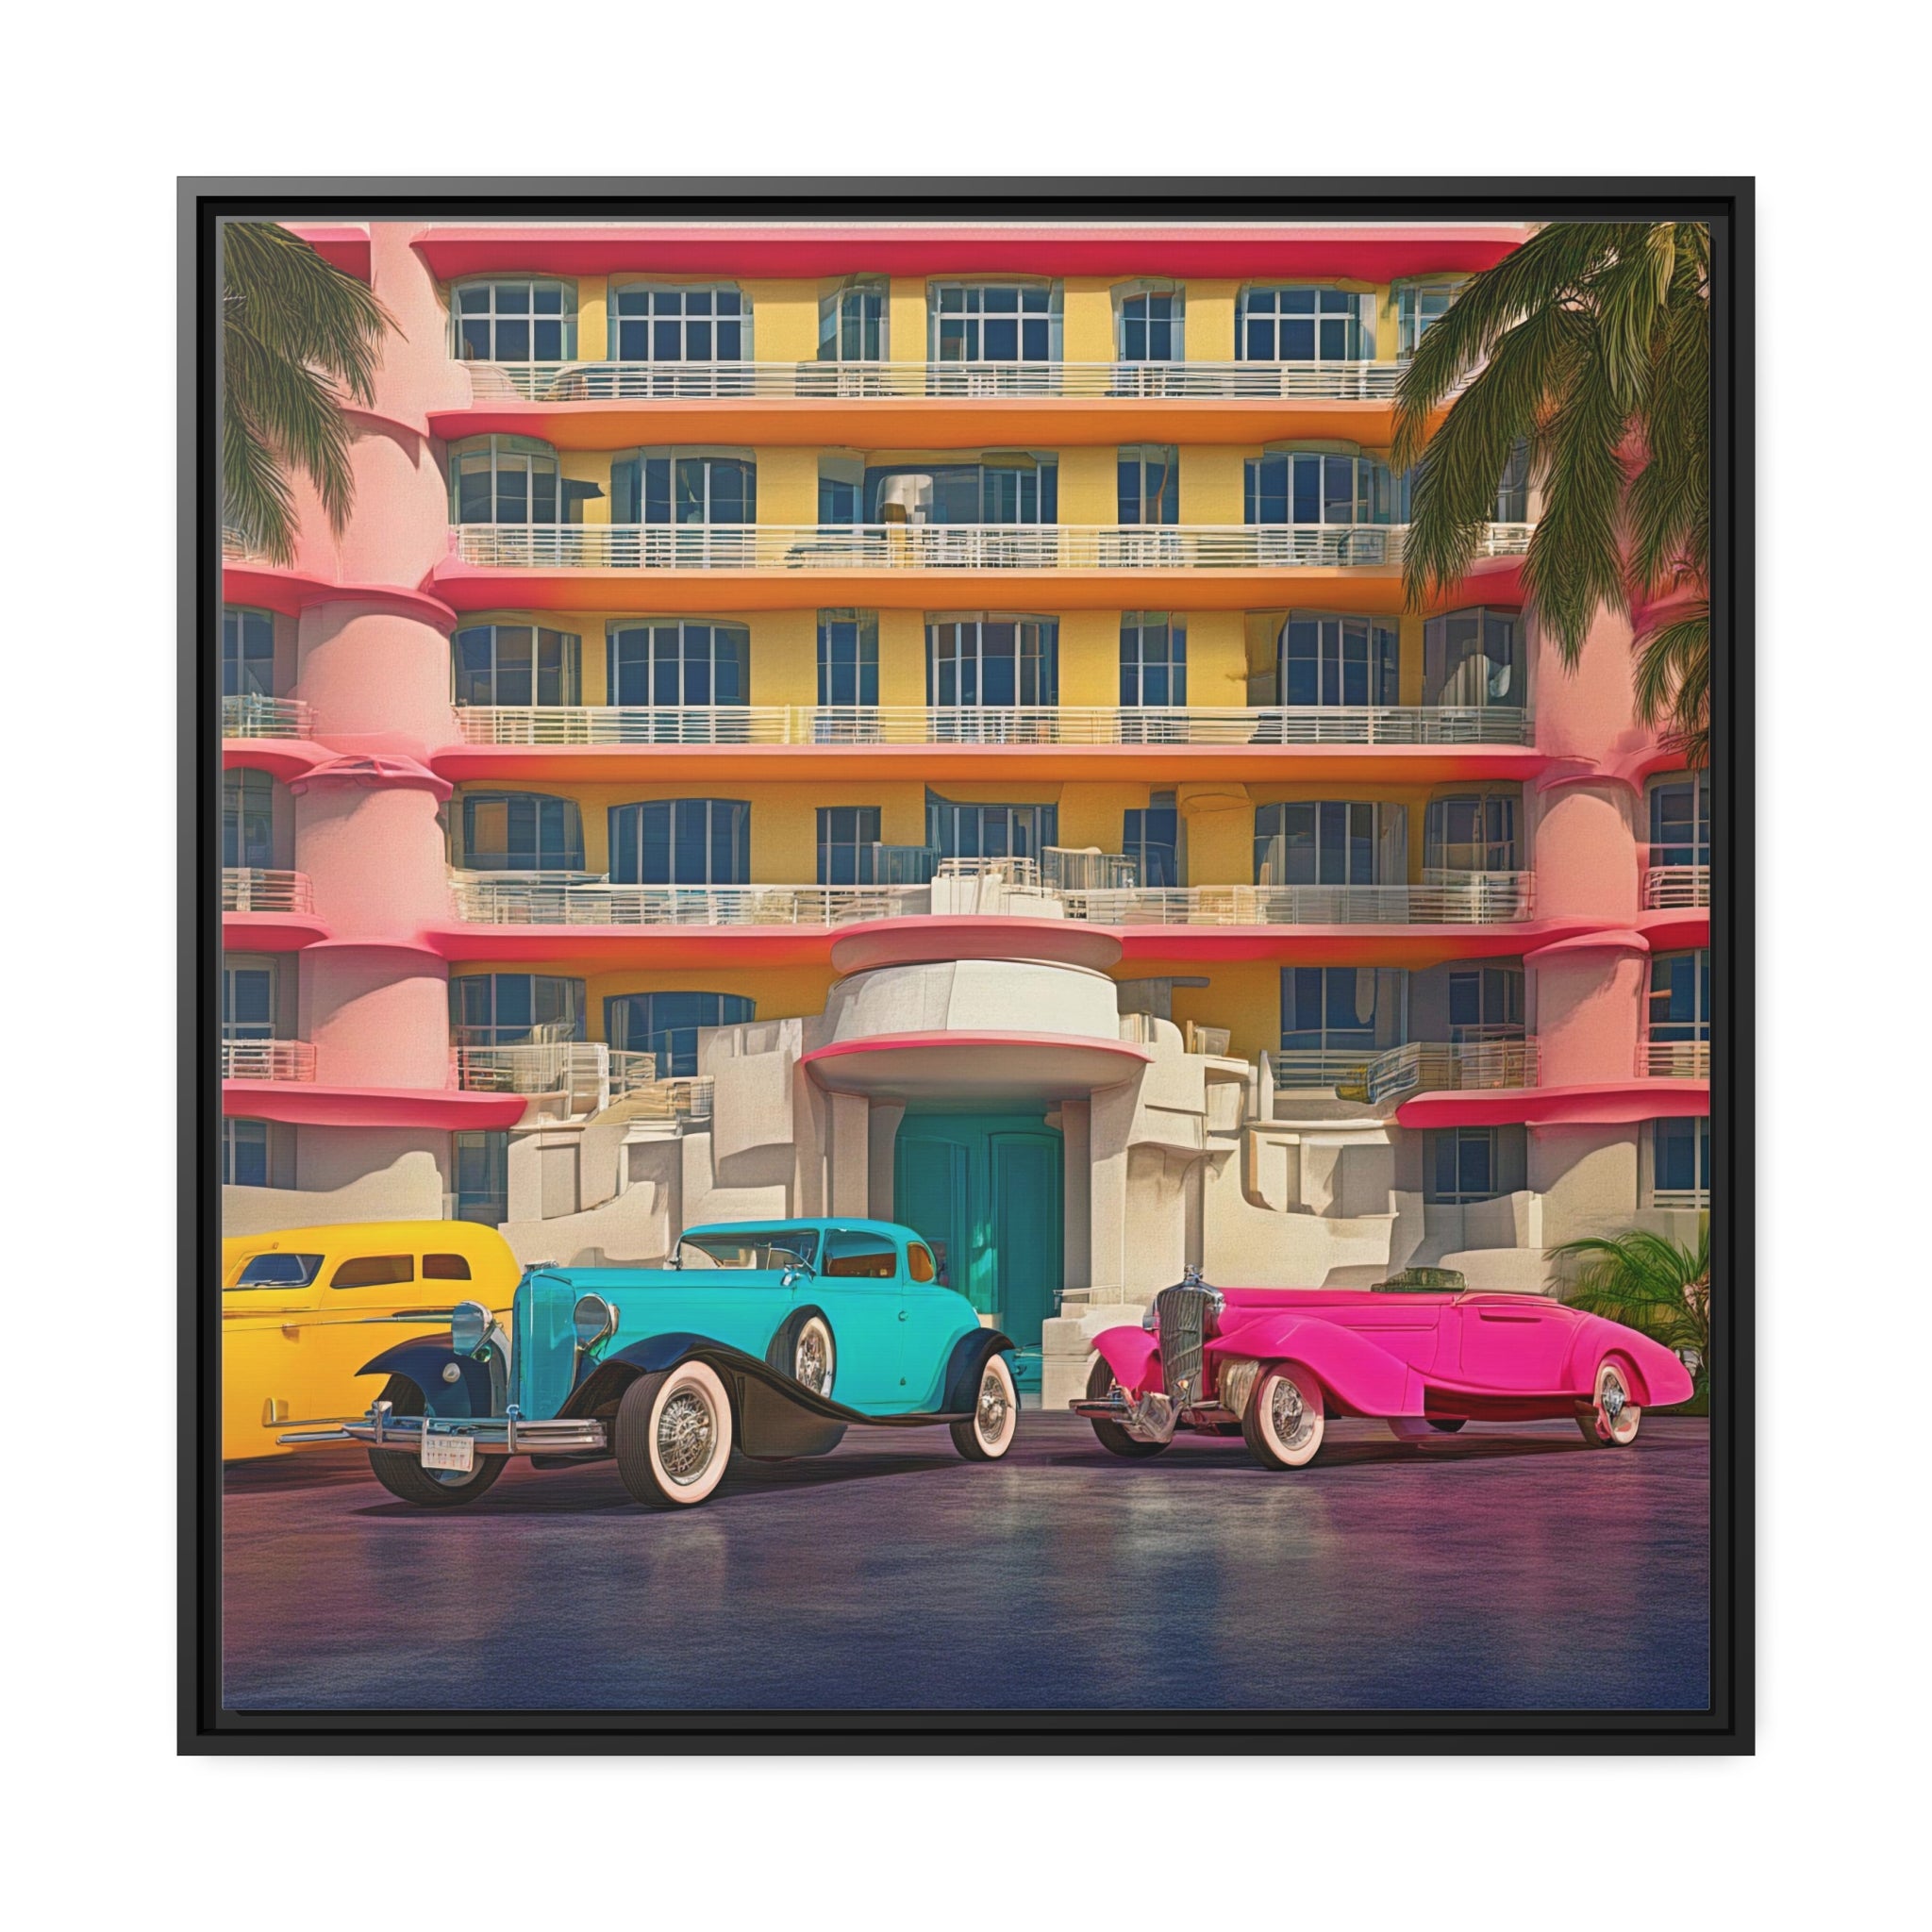 Wall Art I’lll BE RIGHT BACK Canvas Print Art Deco Painting Giclee 32x32 + Frame Love Beauty Design House Home Office Decor Gift Ready to Hang